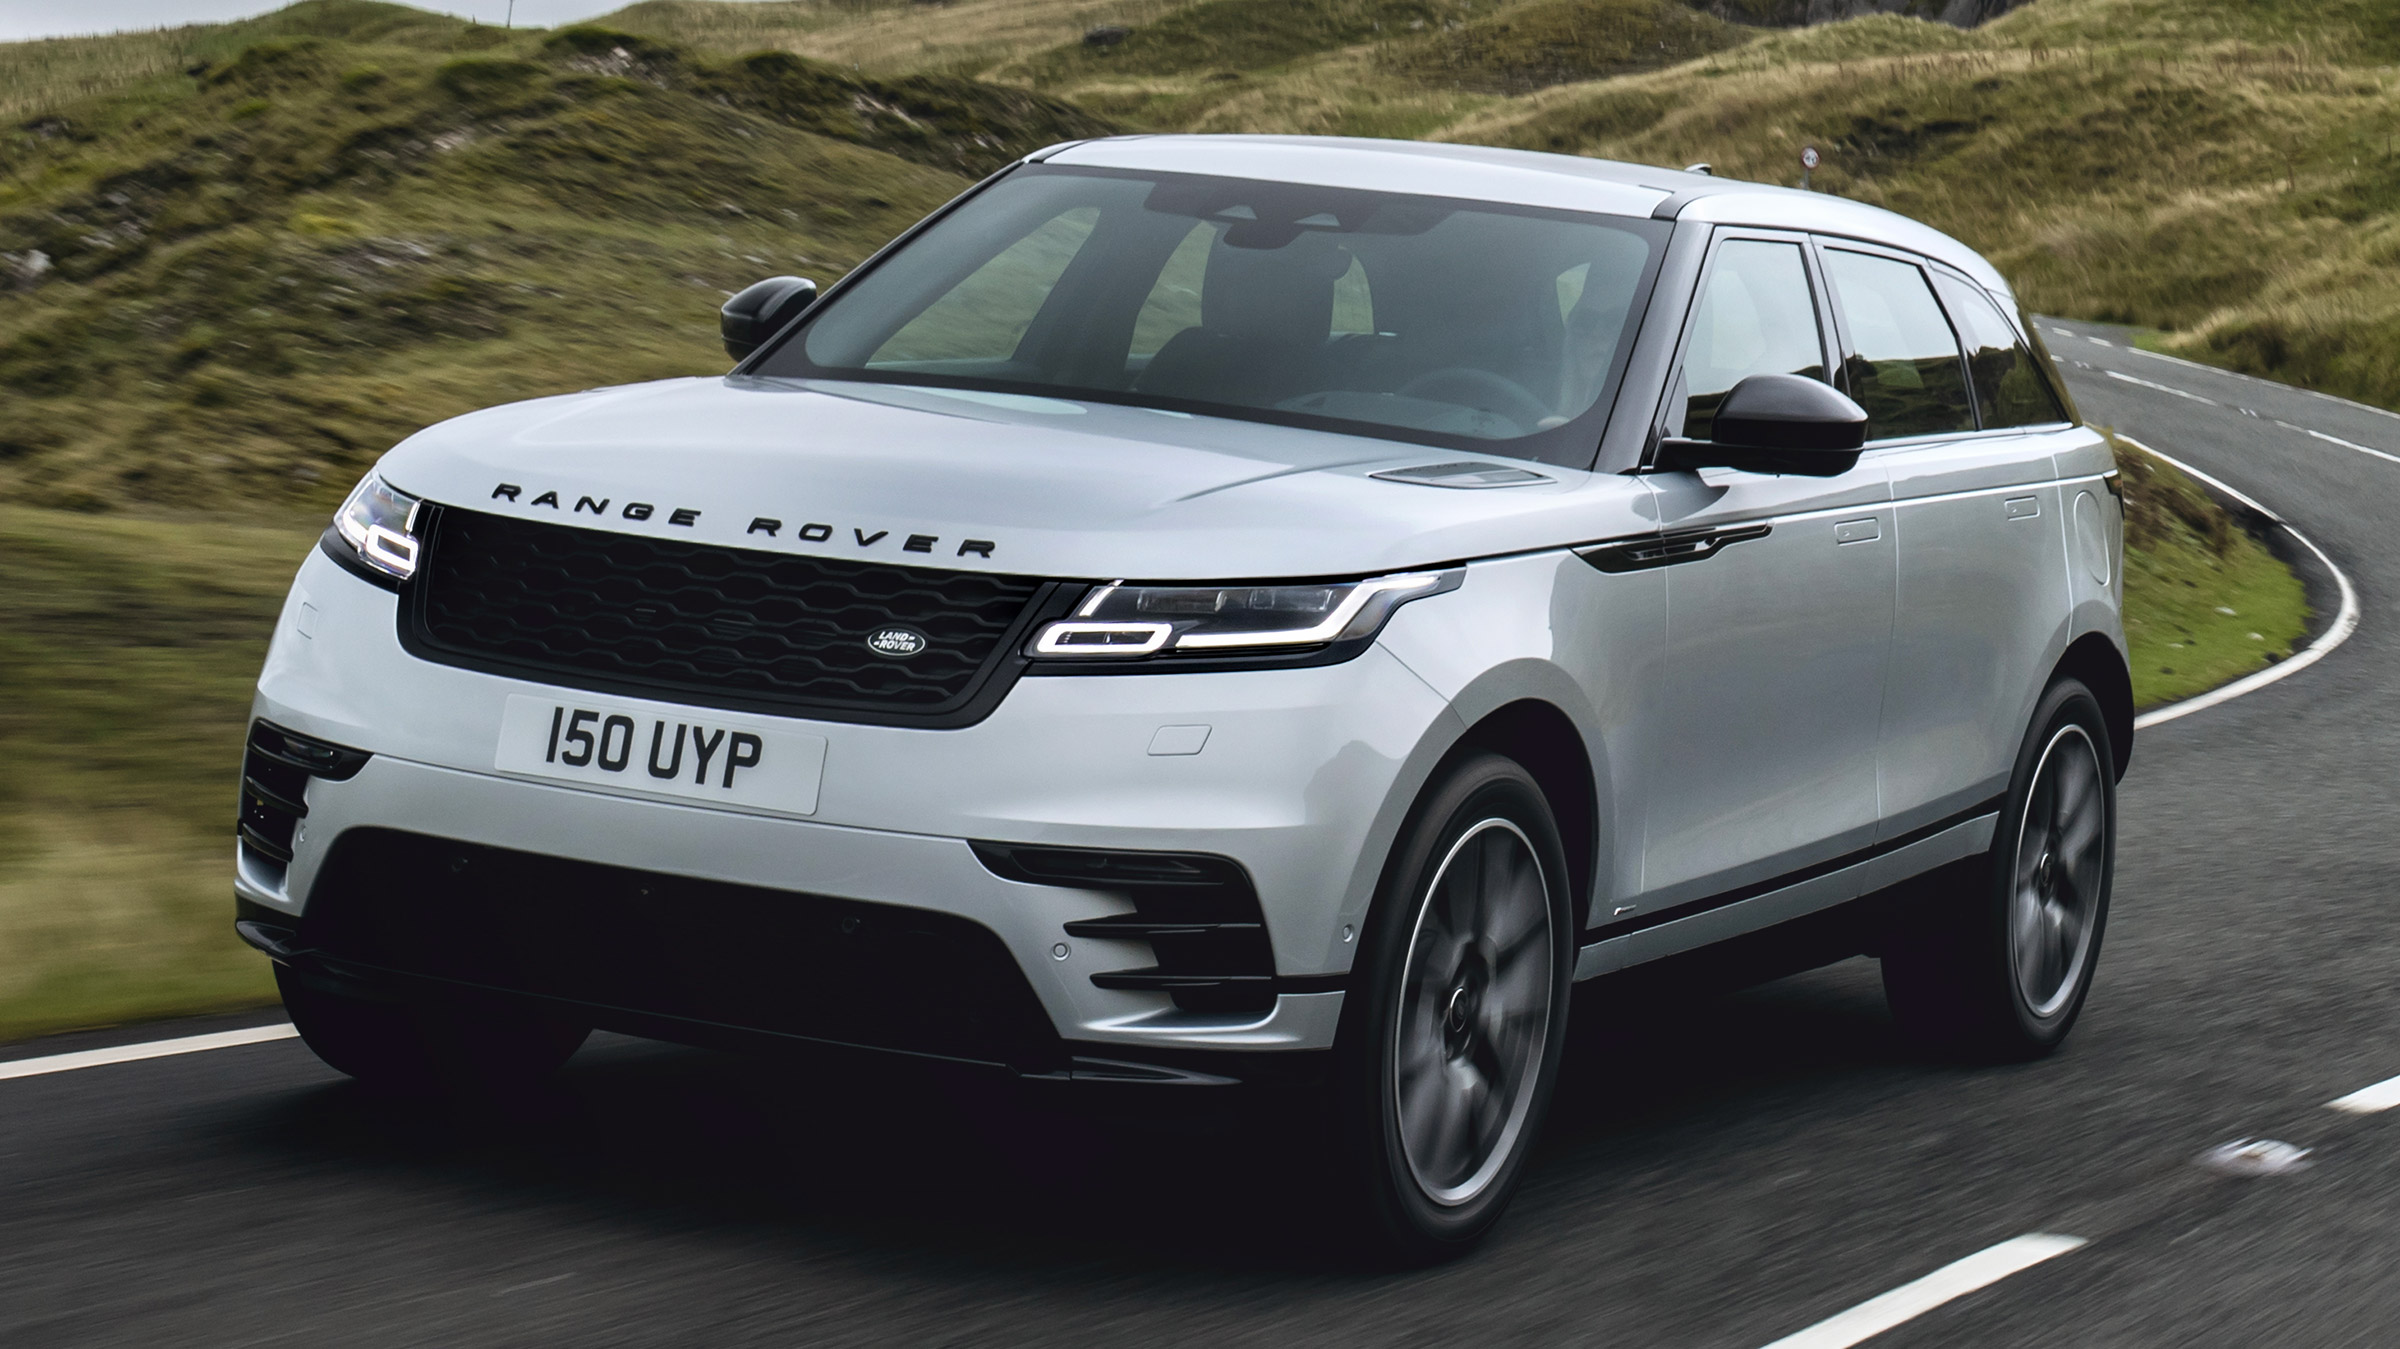 New Range Rover Velar PHEV launched with 33mile electric range Auto